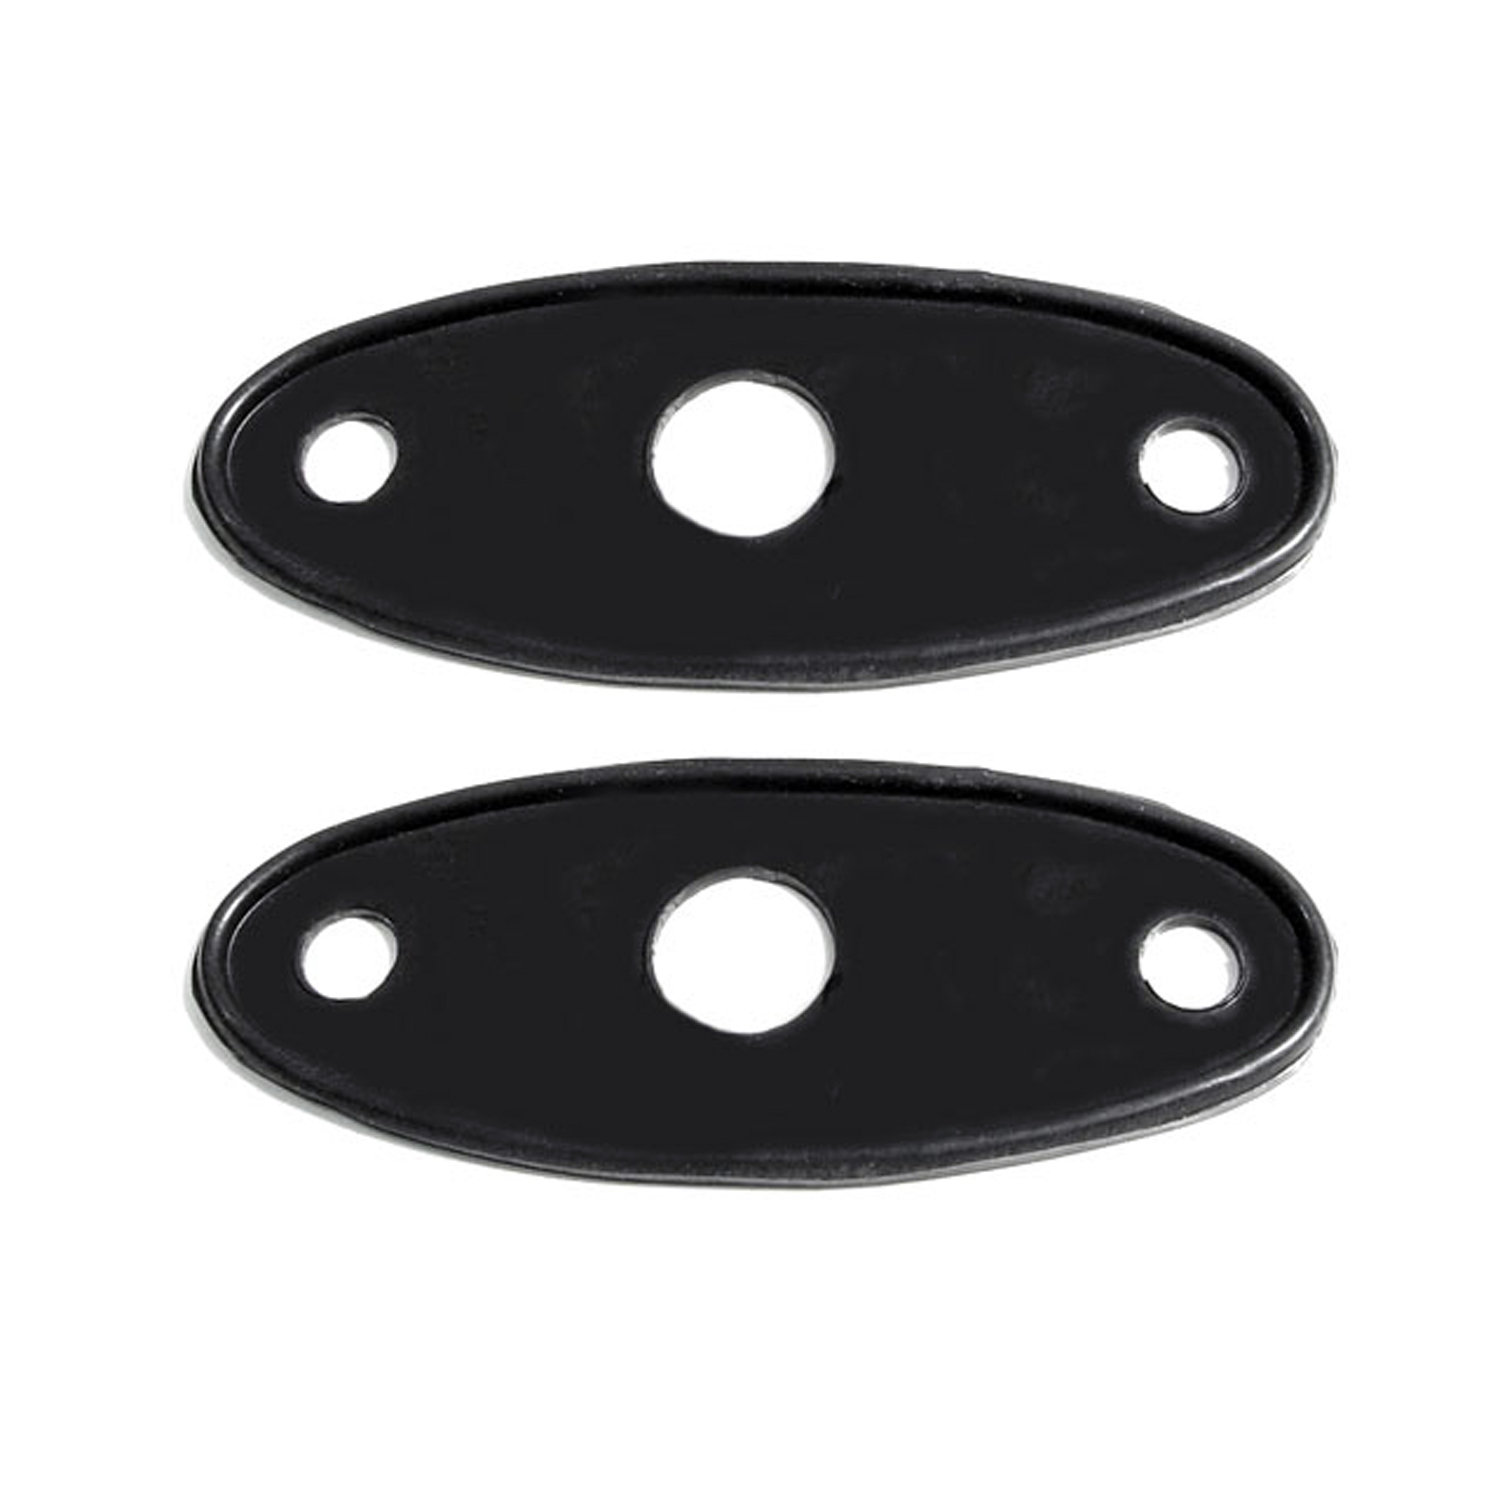 1931 Reo Flying Cloud Side Tire Bracket Mounting Pads.  1-1/2 wide X 3-4/8 long-MP 993-C